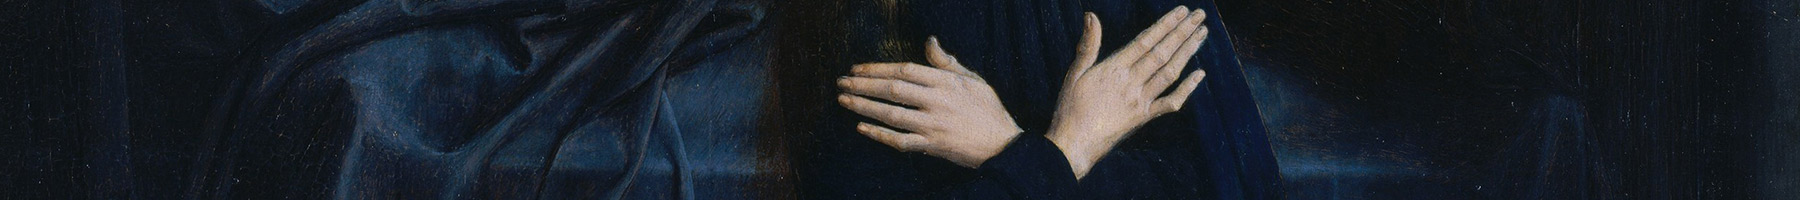 painting of Mary kneeling